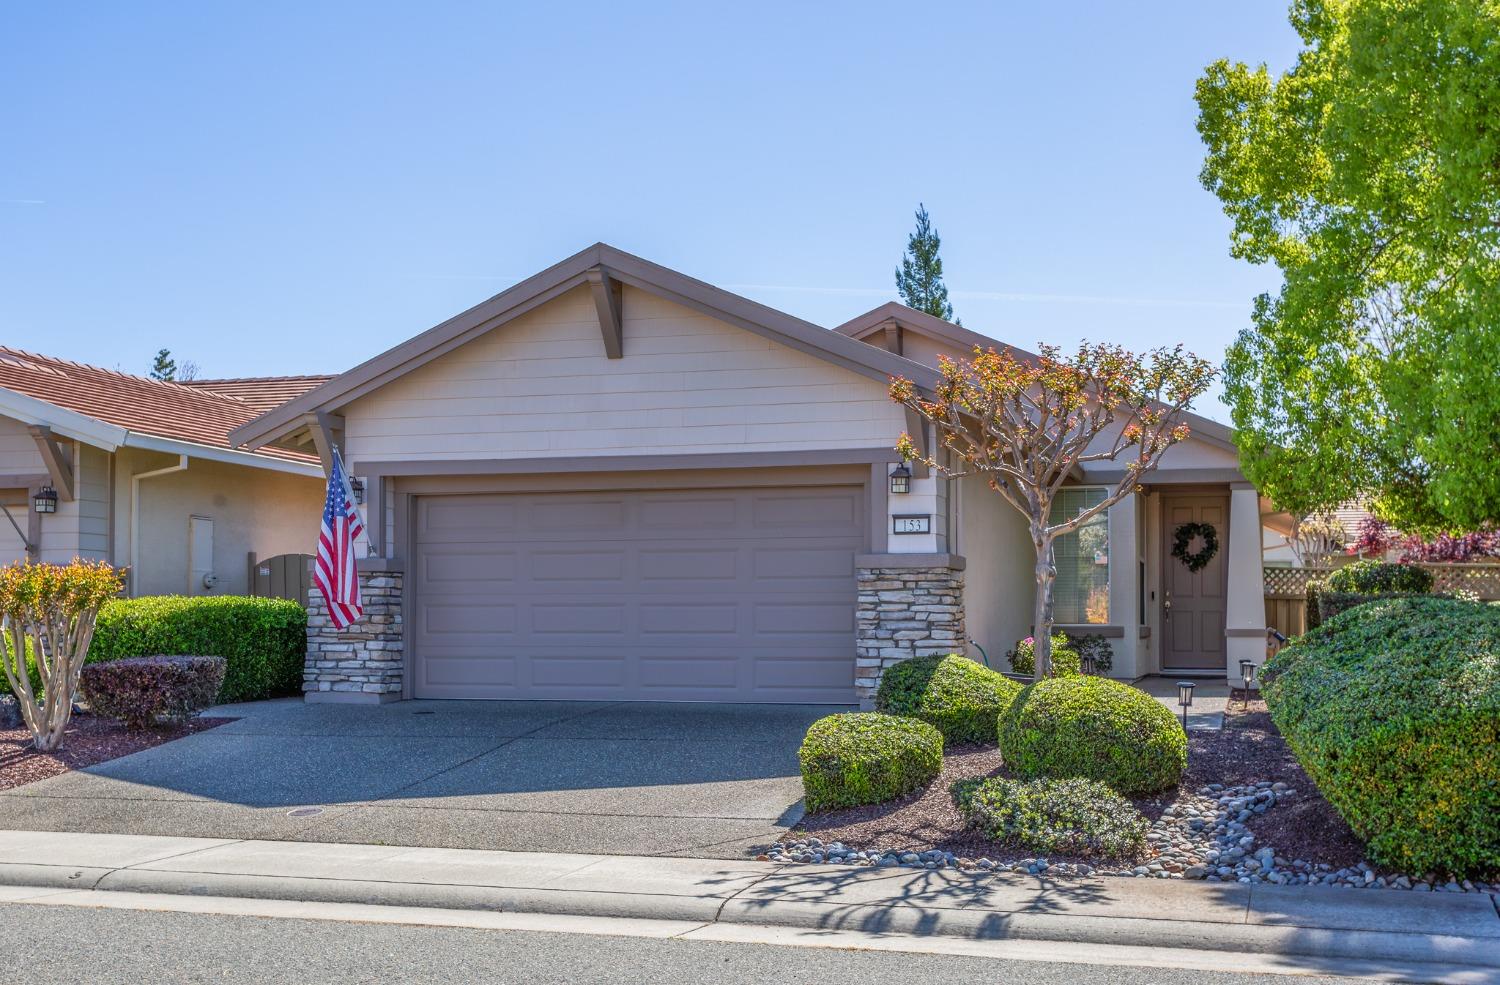 Photo of 153 Whitehall Ln in Lincoln, CA